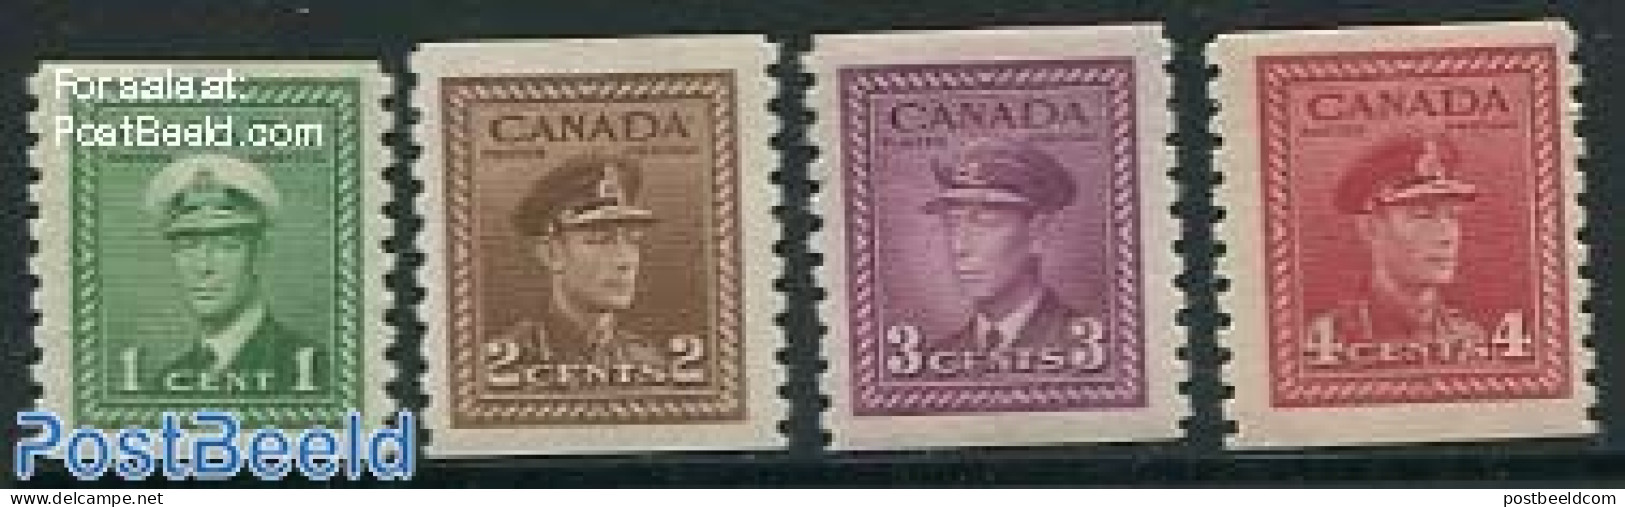 Canada 1942 Definitives, Coil, Perf. 9.5 4v, Mint NH - Unused Stamps